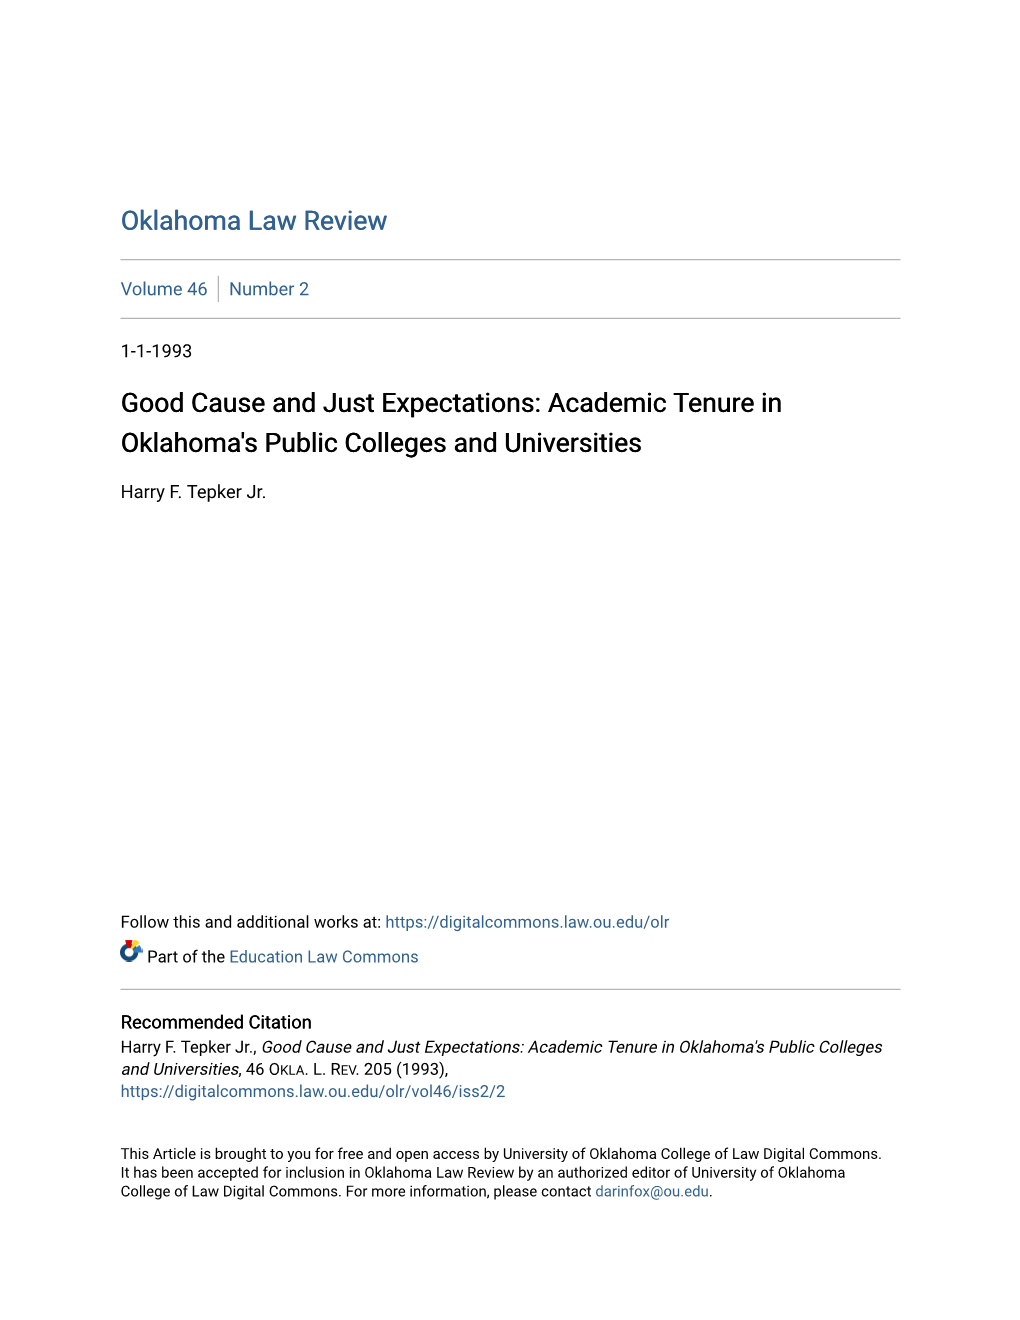 Academic Tenure in Oklahoma's Public Colleges and Universities